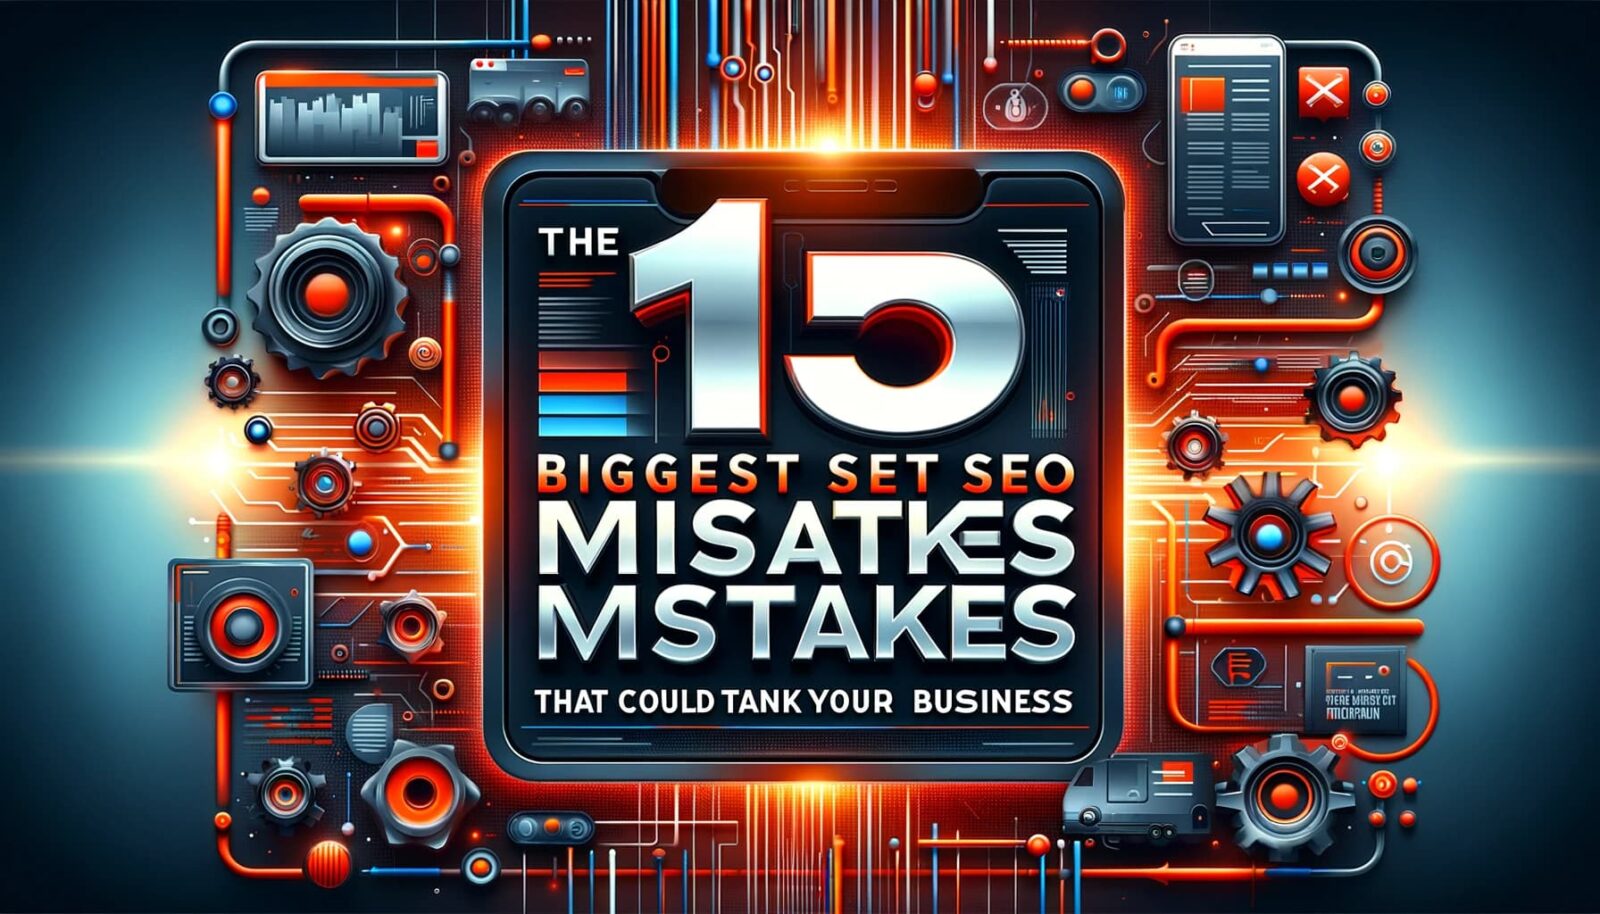 'The 15 Biggest SEO Mistakes That Could Tank Your Business'.